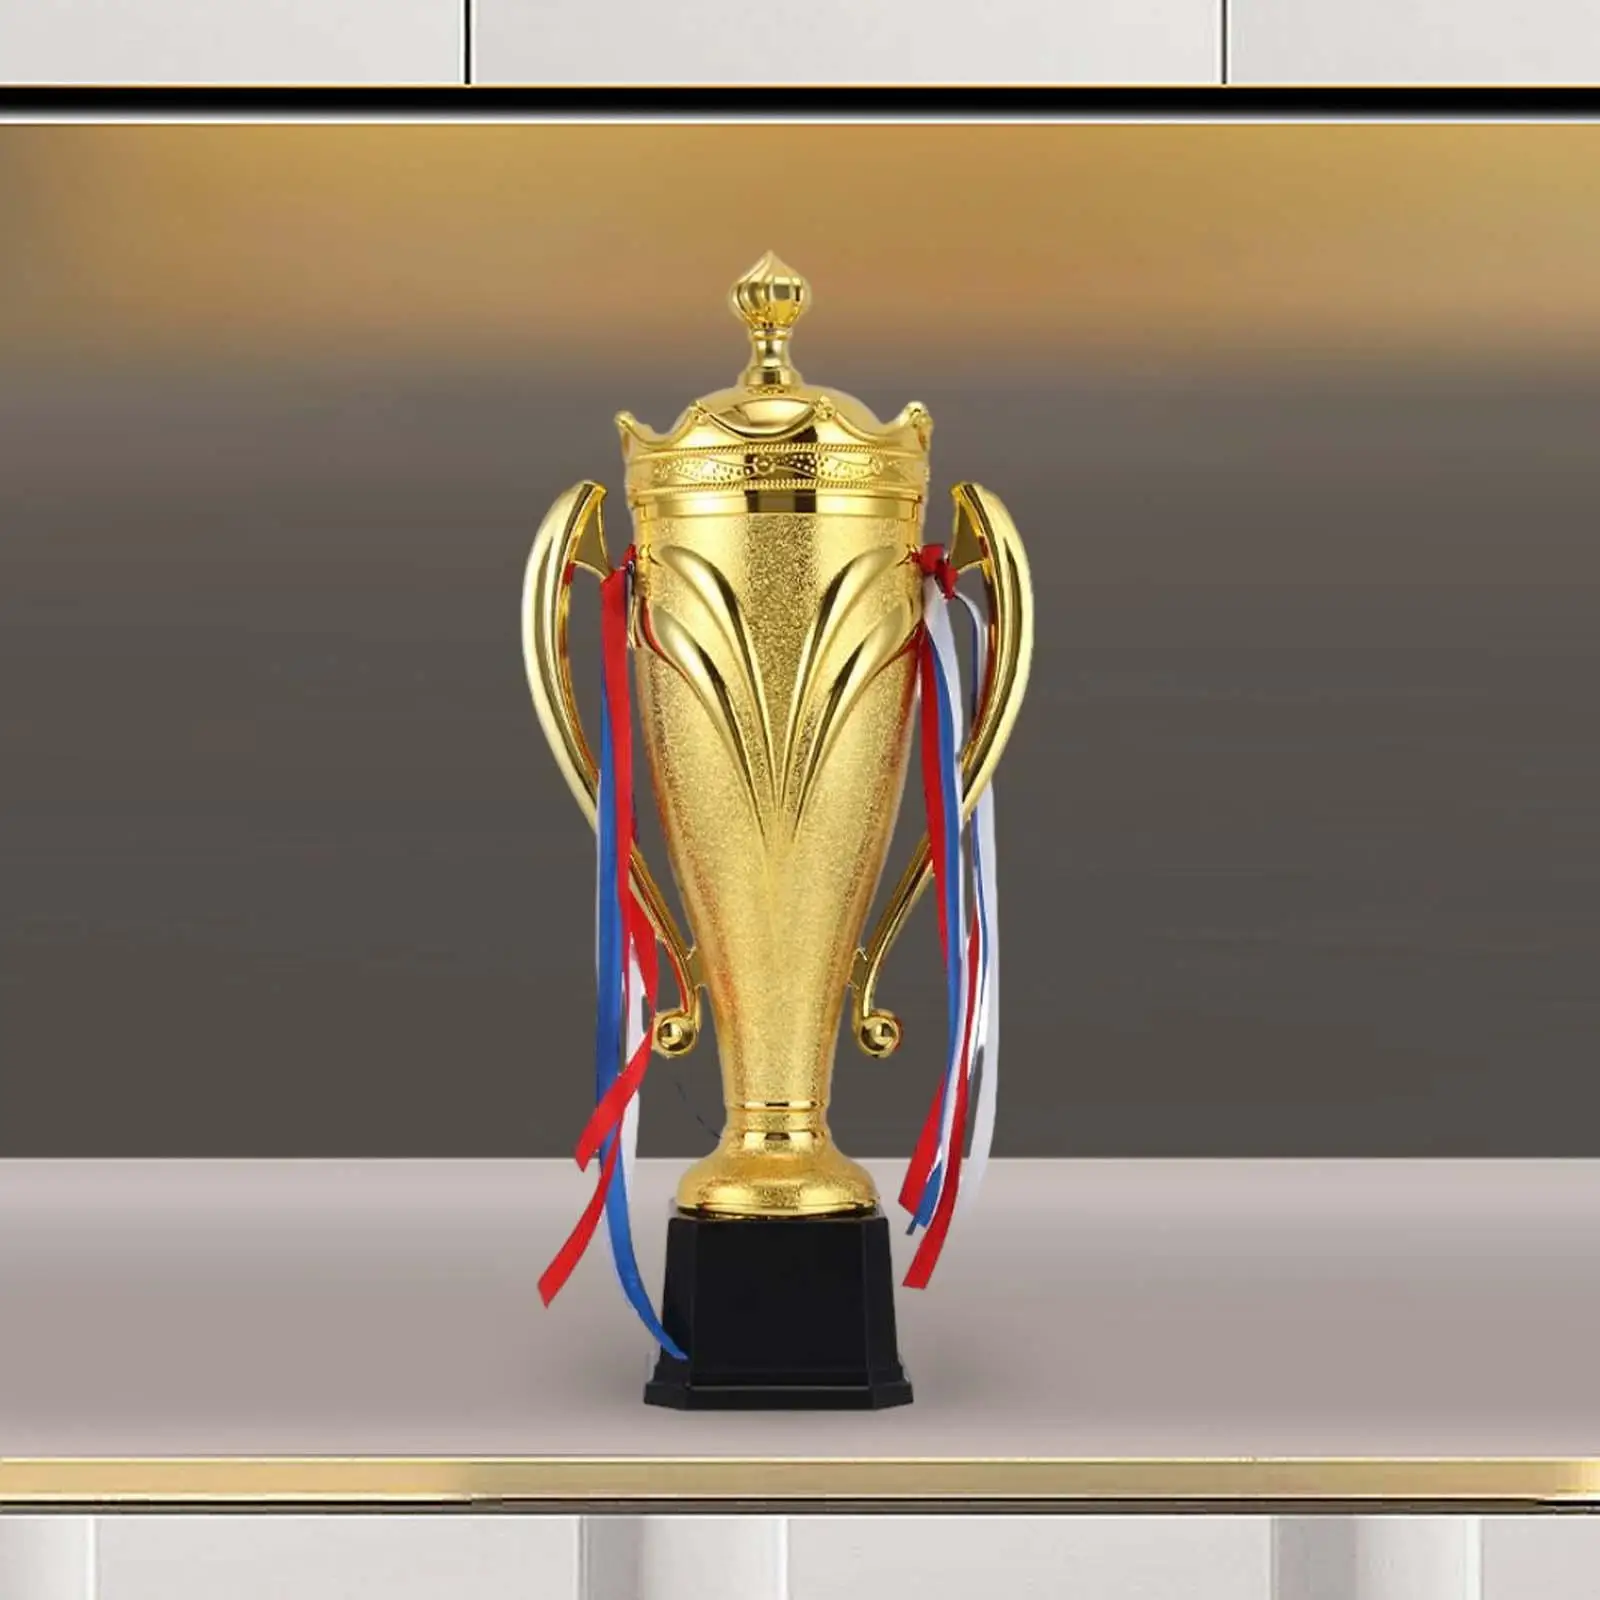 PP Material Winner Award Trophies Cup Gold Color Multipurpose Party Favors Props Lightweight for Sport Tournaments Games